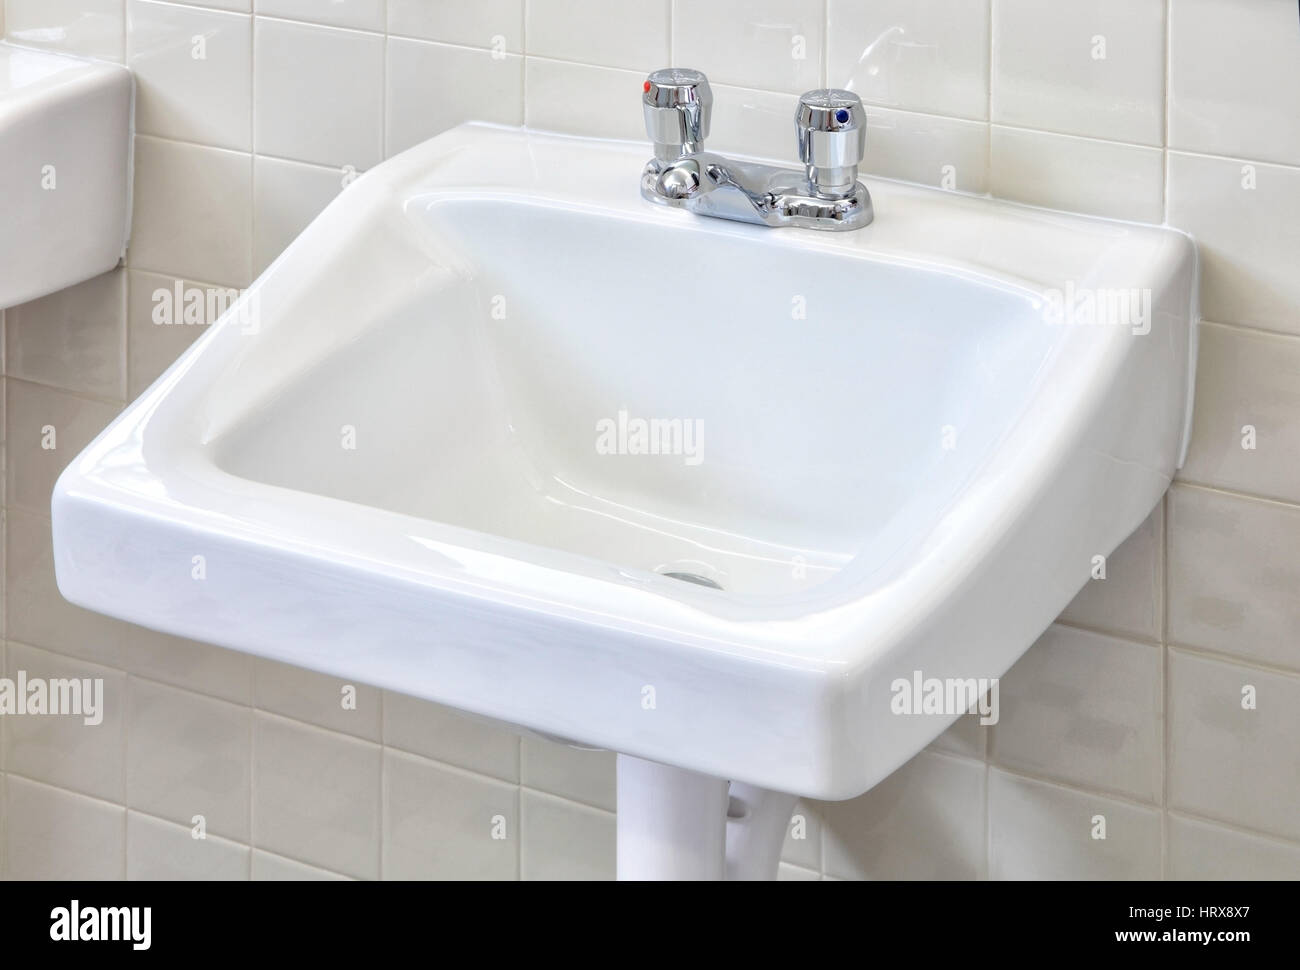 A water saving, conservation faucet installed on a wash basin in a public restroom. Stock Photo